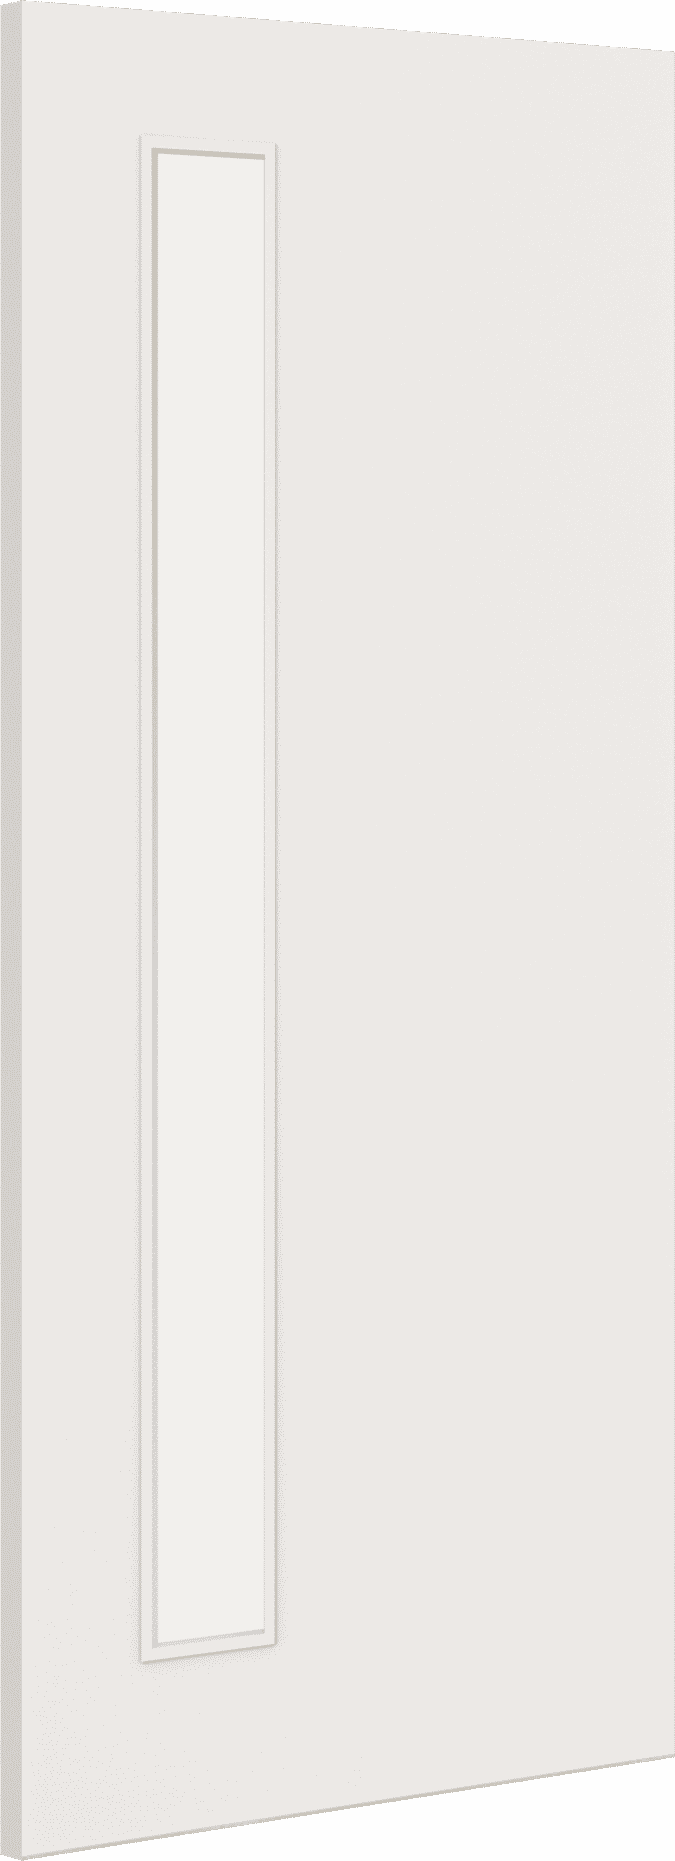 1981mm x 838mm x 44mm (33") Architectural Paint Grade White 06 Frosted Glazed Fire Door Blank